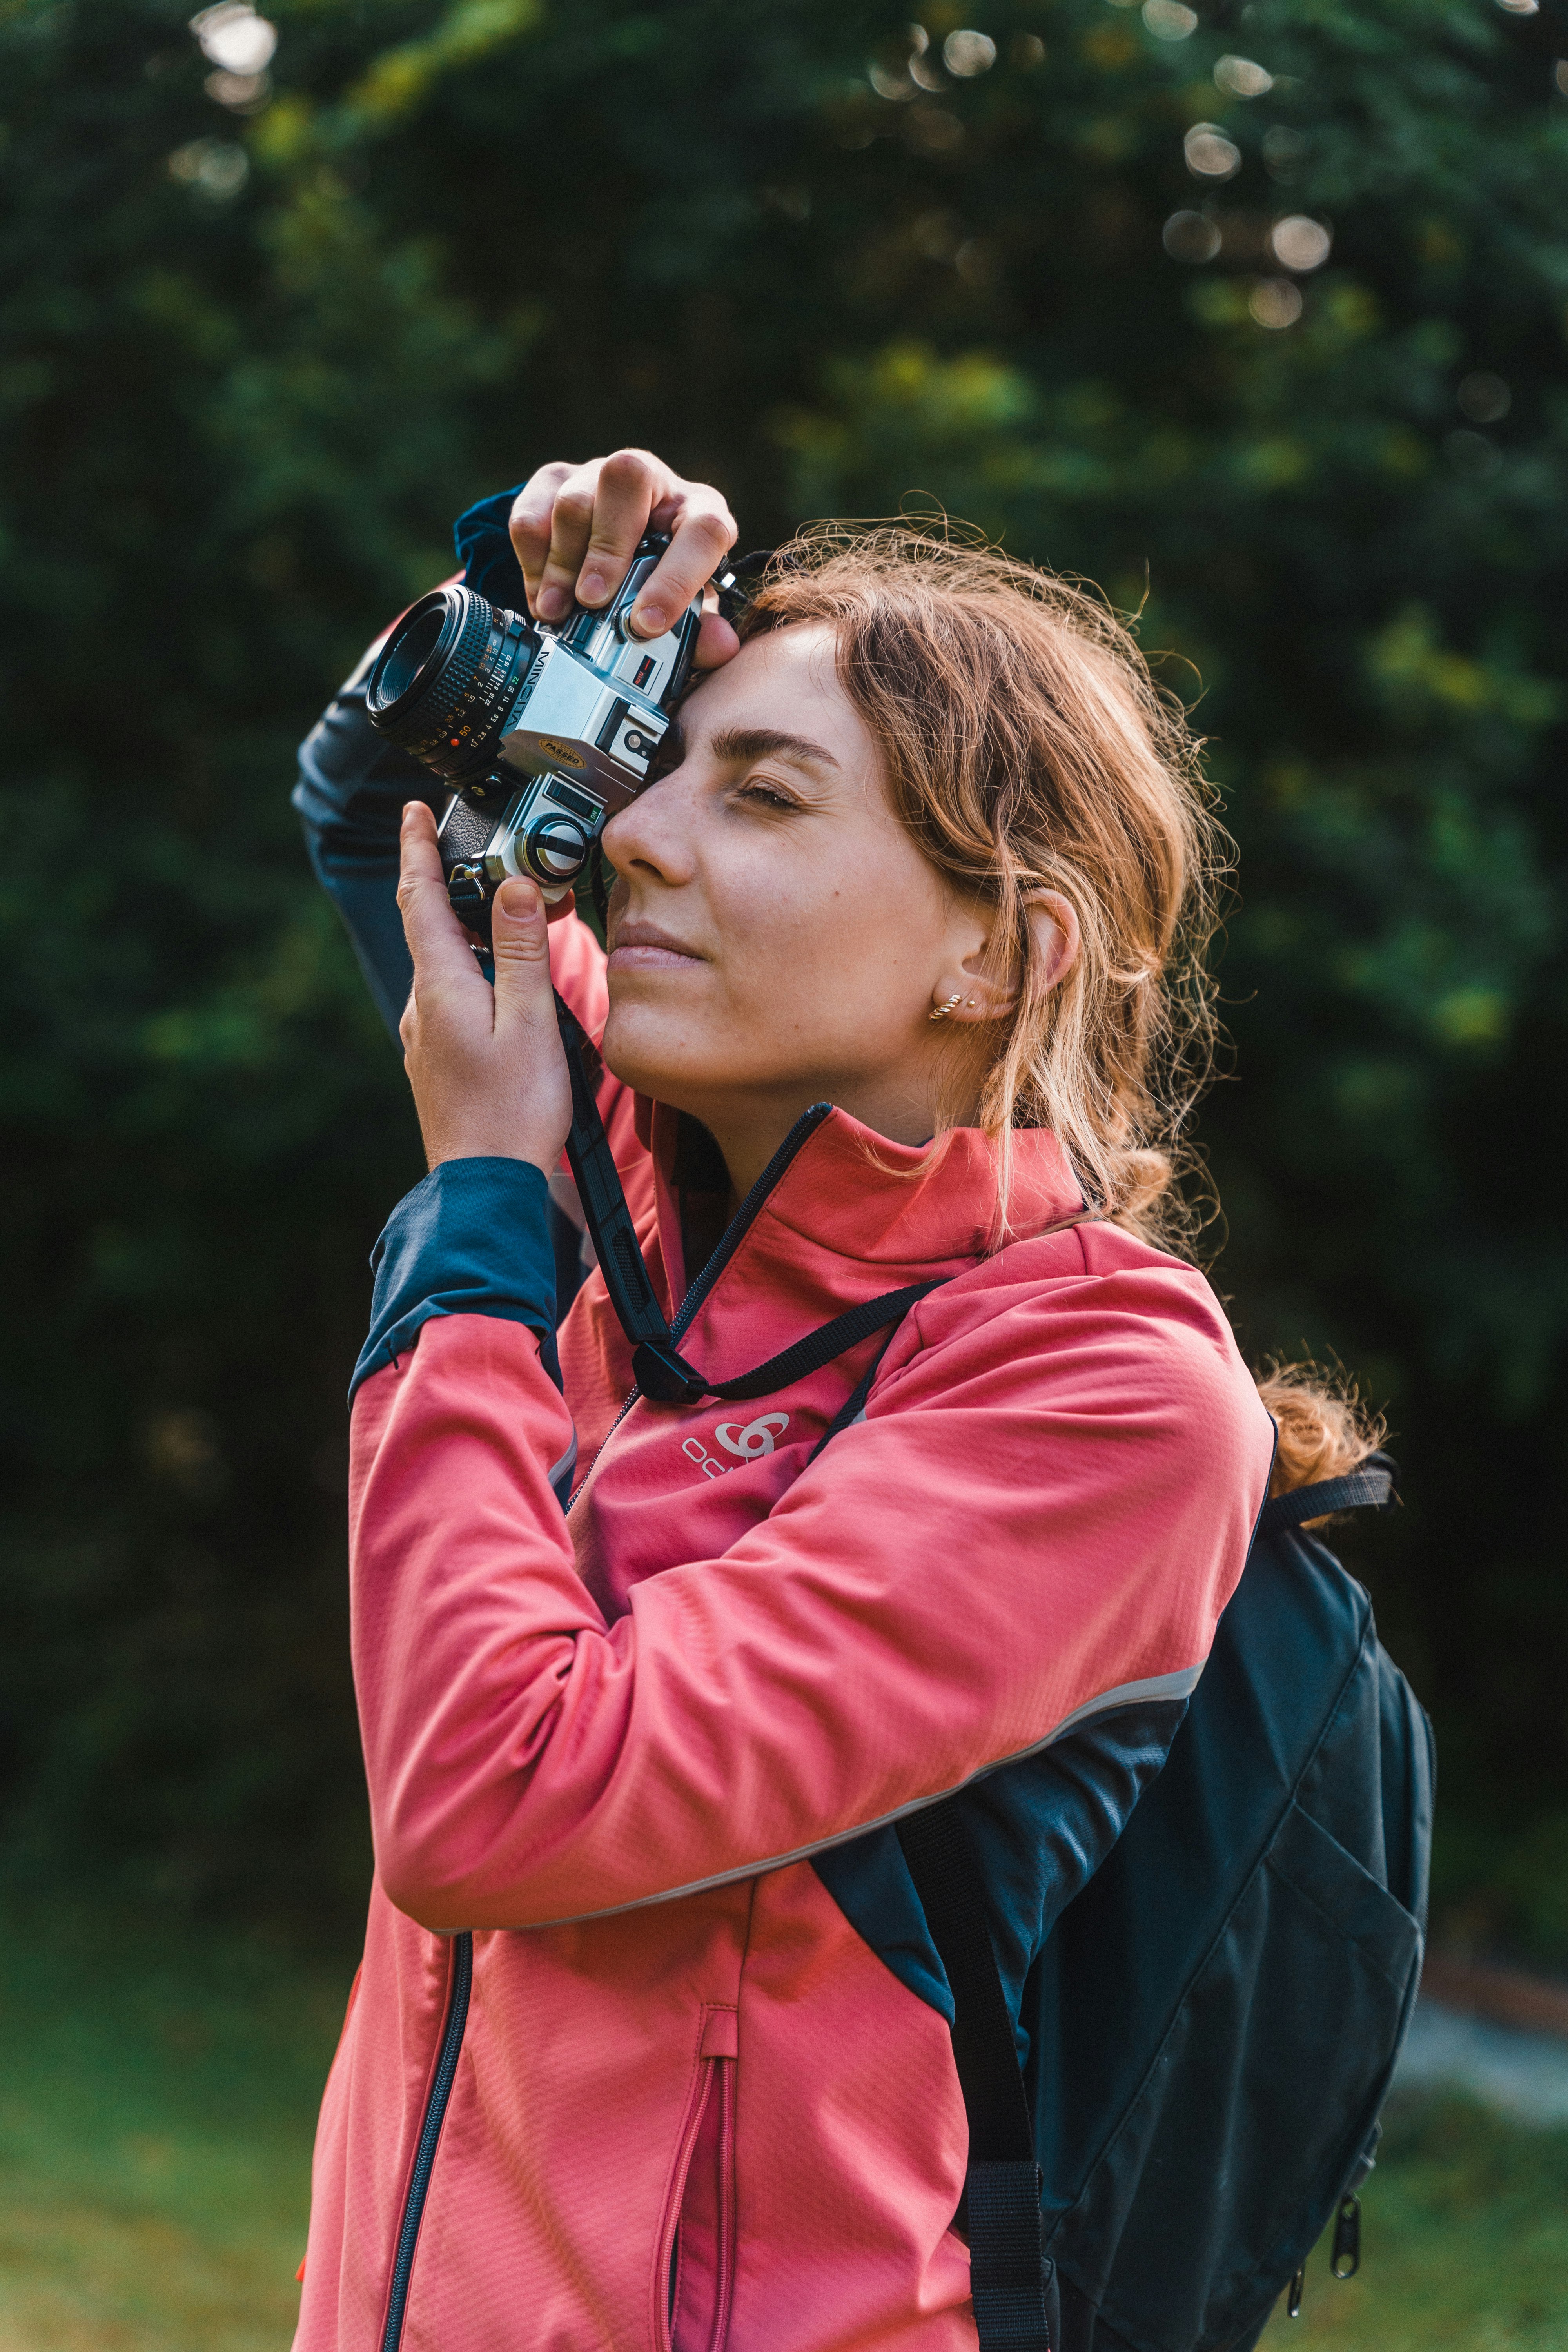 woman in red jacket holding black dslr camera